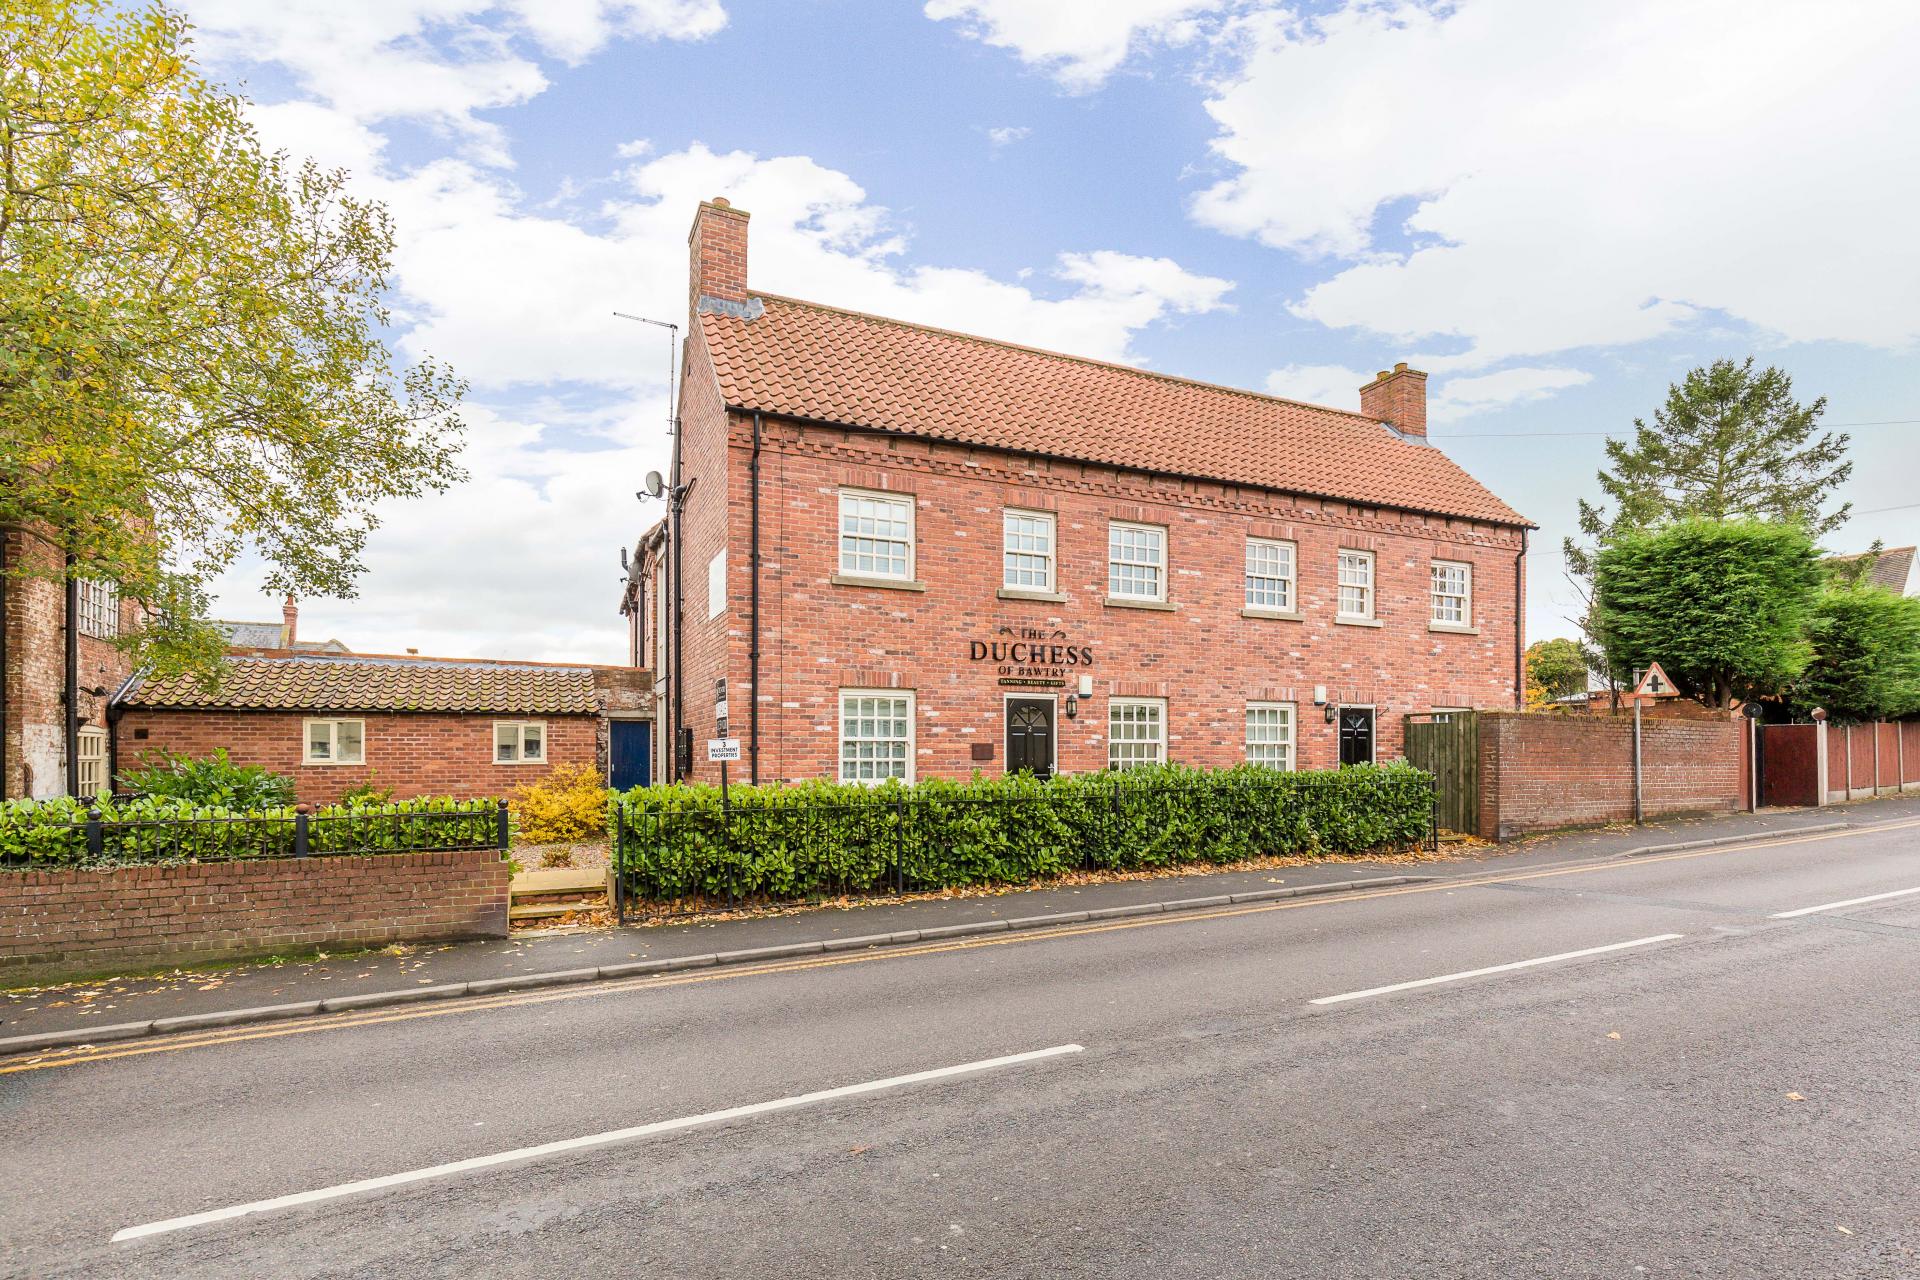 2 bedroom Apartment for sale in Bawtry